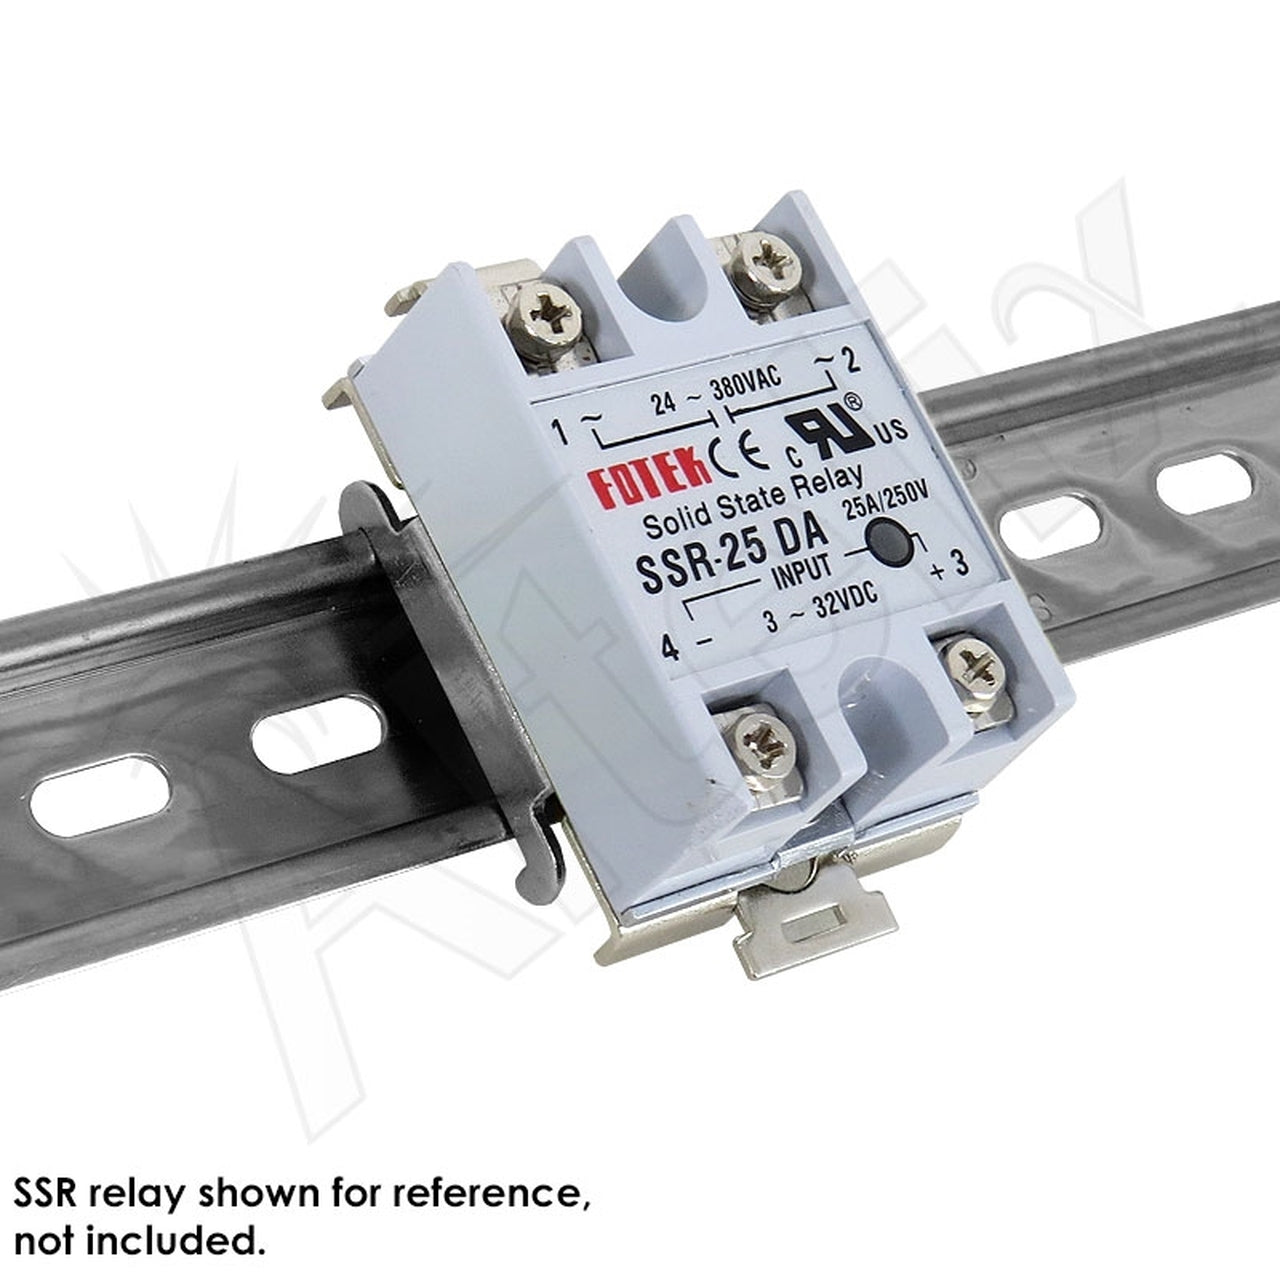 35mm DIN Rail Mounting Clip for SSR Type Relays-2